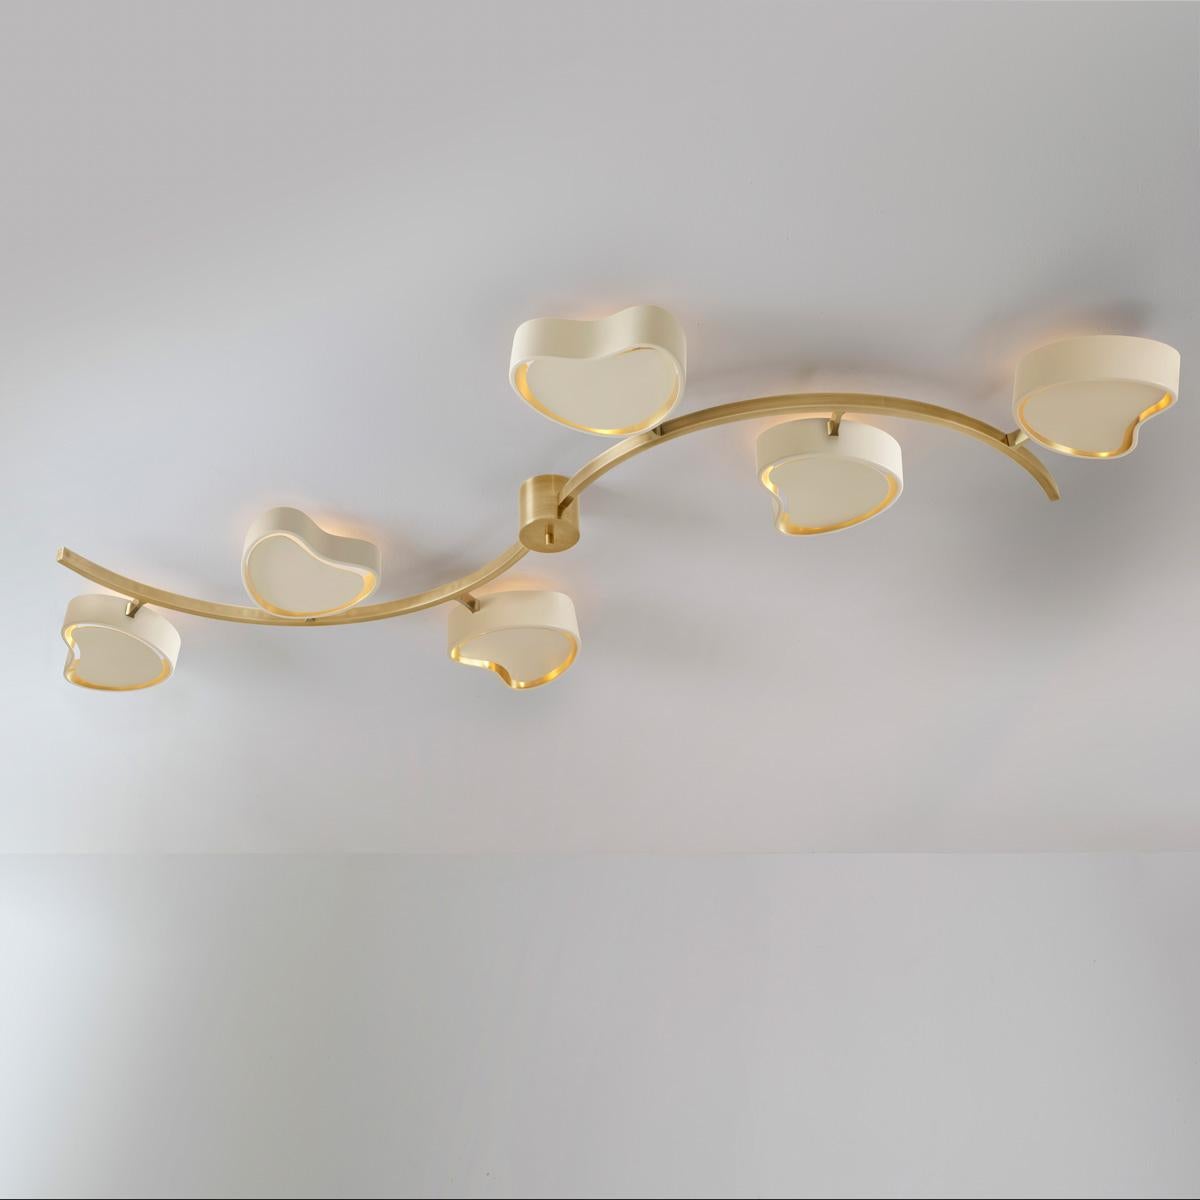 Modern Cuore N.6 Ceiling Light by Gaspare Asaro. Satin Brass and Sand White Finish For Sale